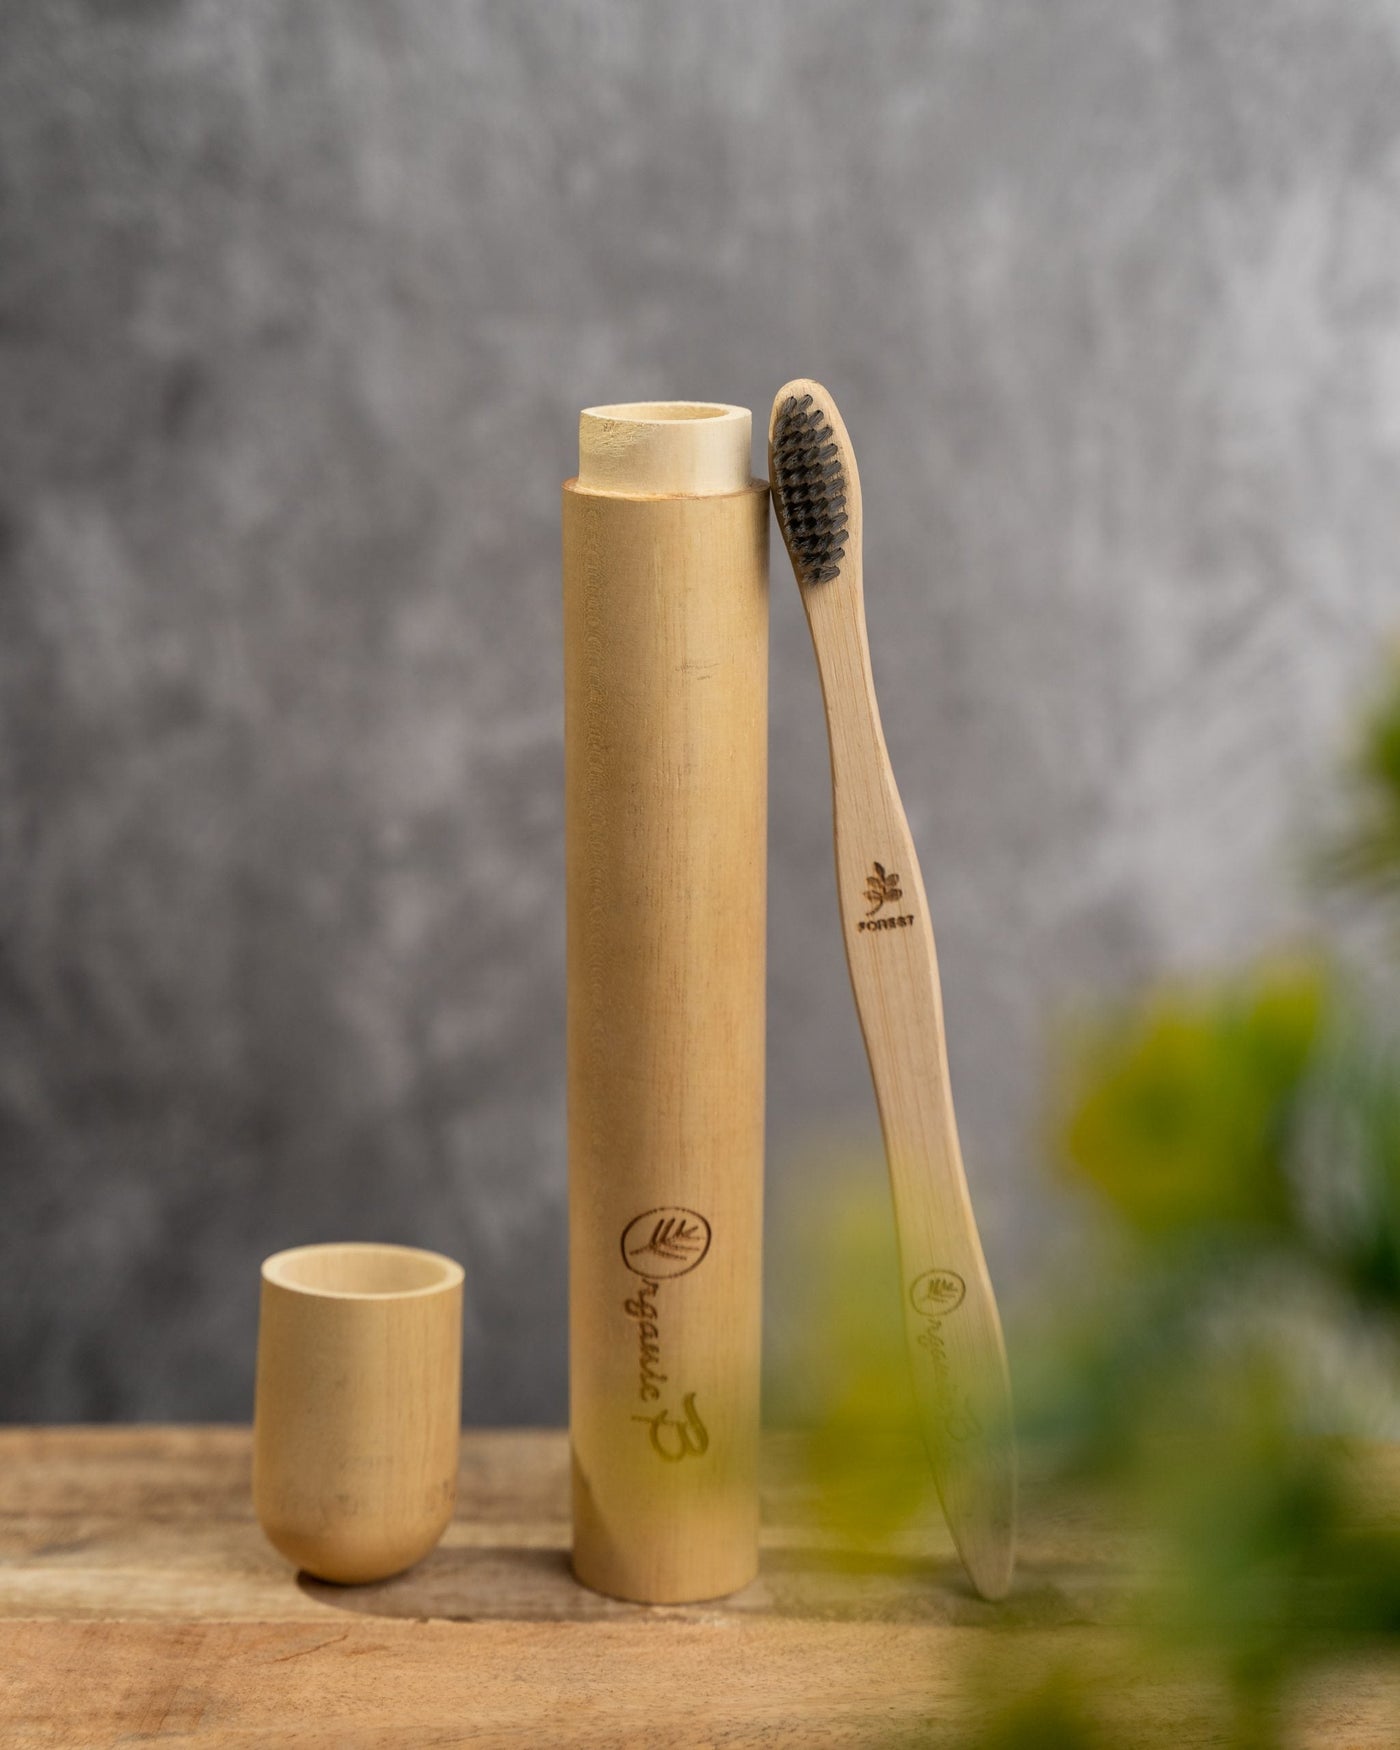 Eco Friendly Travel Case with Bamboo Charcoal Toothbrush - Suspire